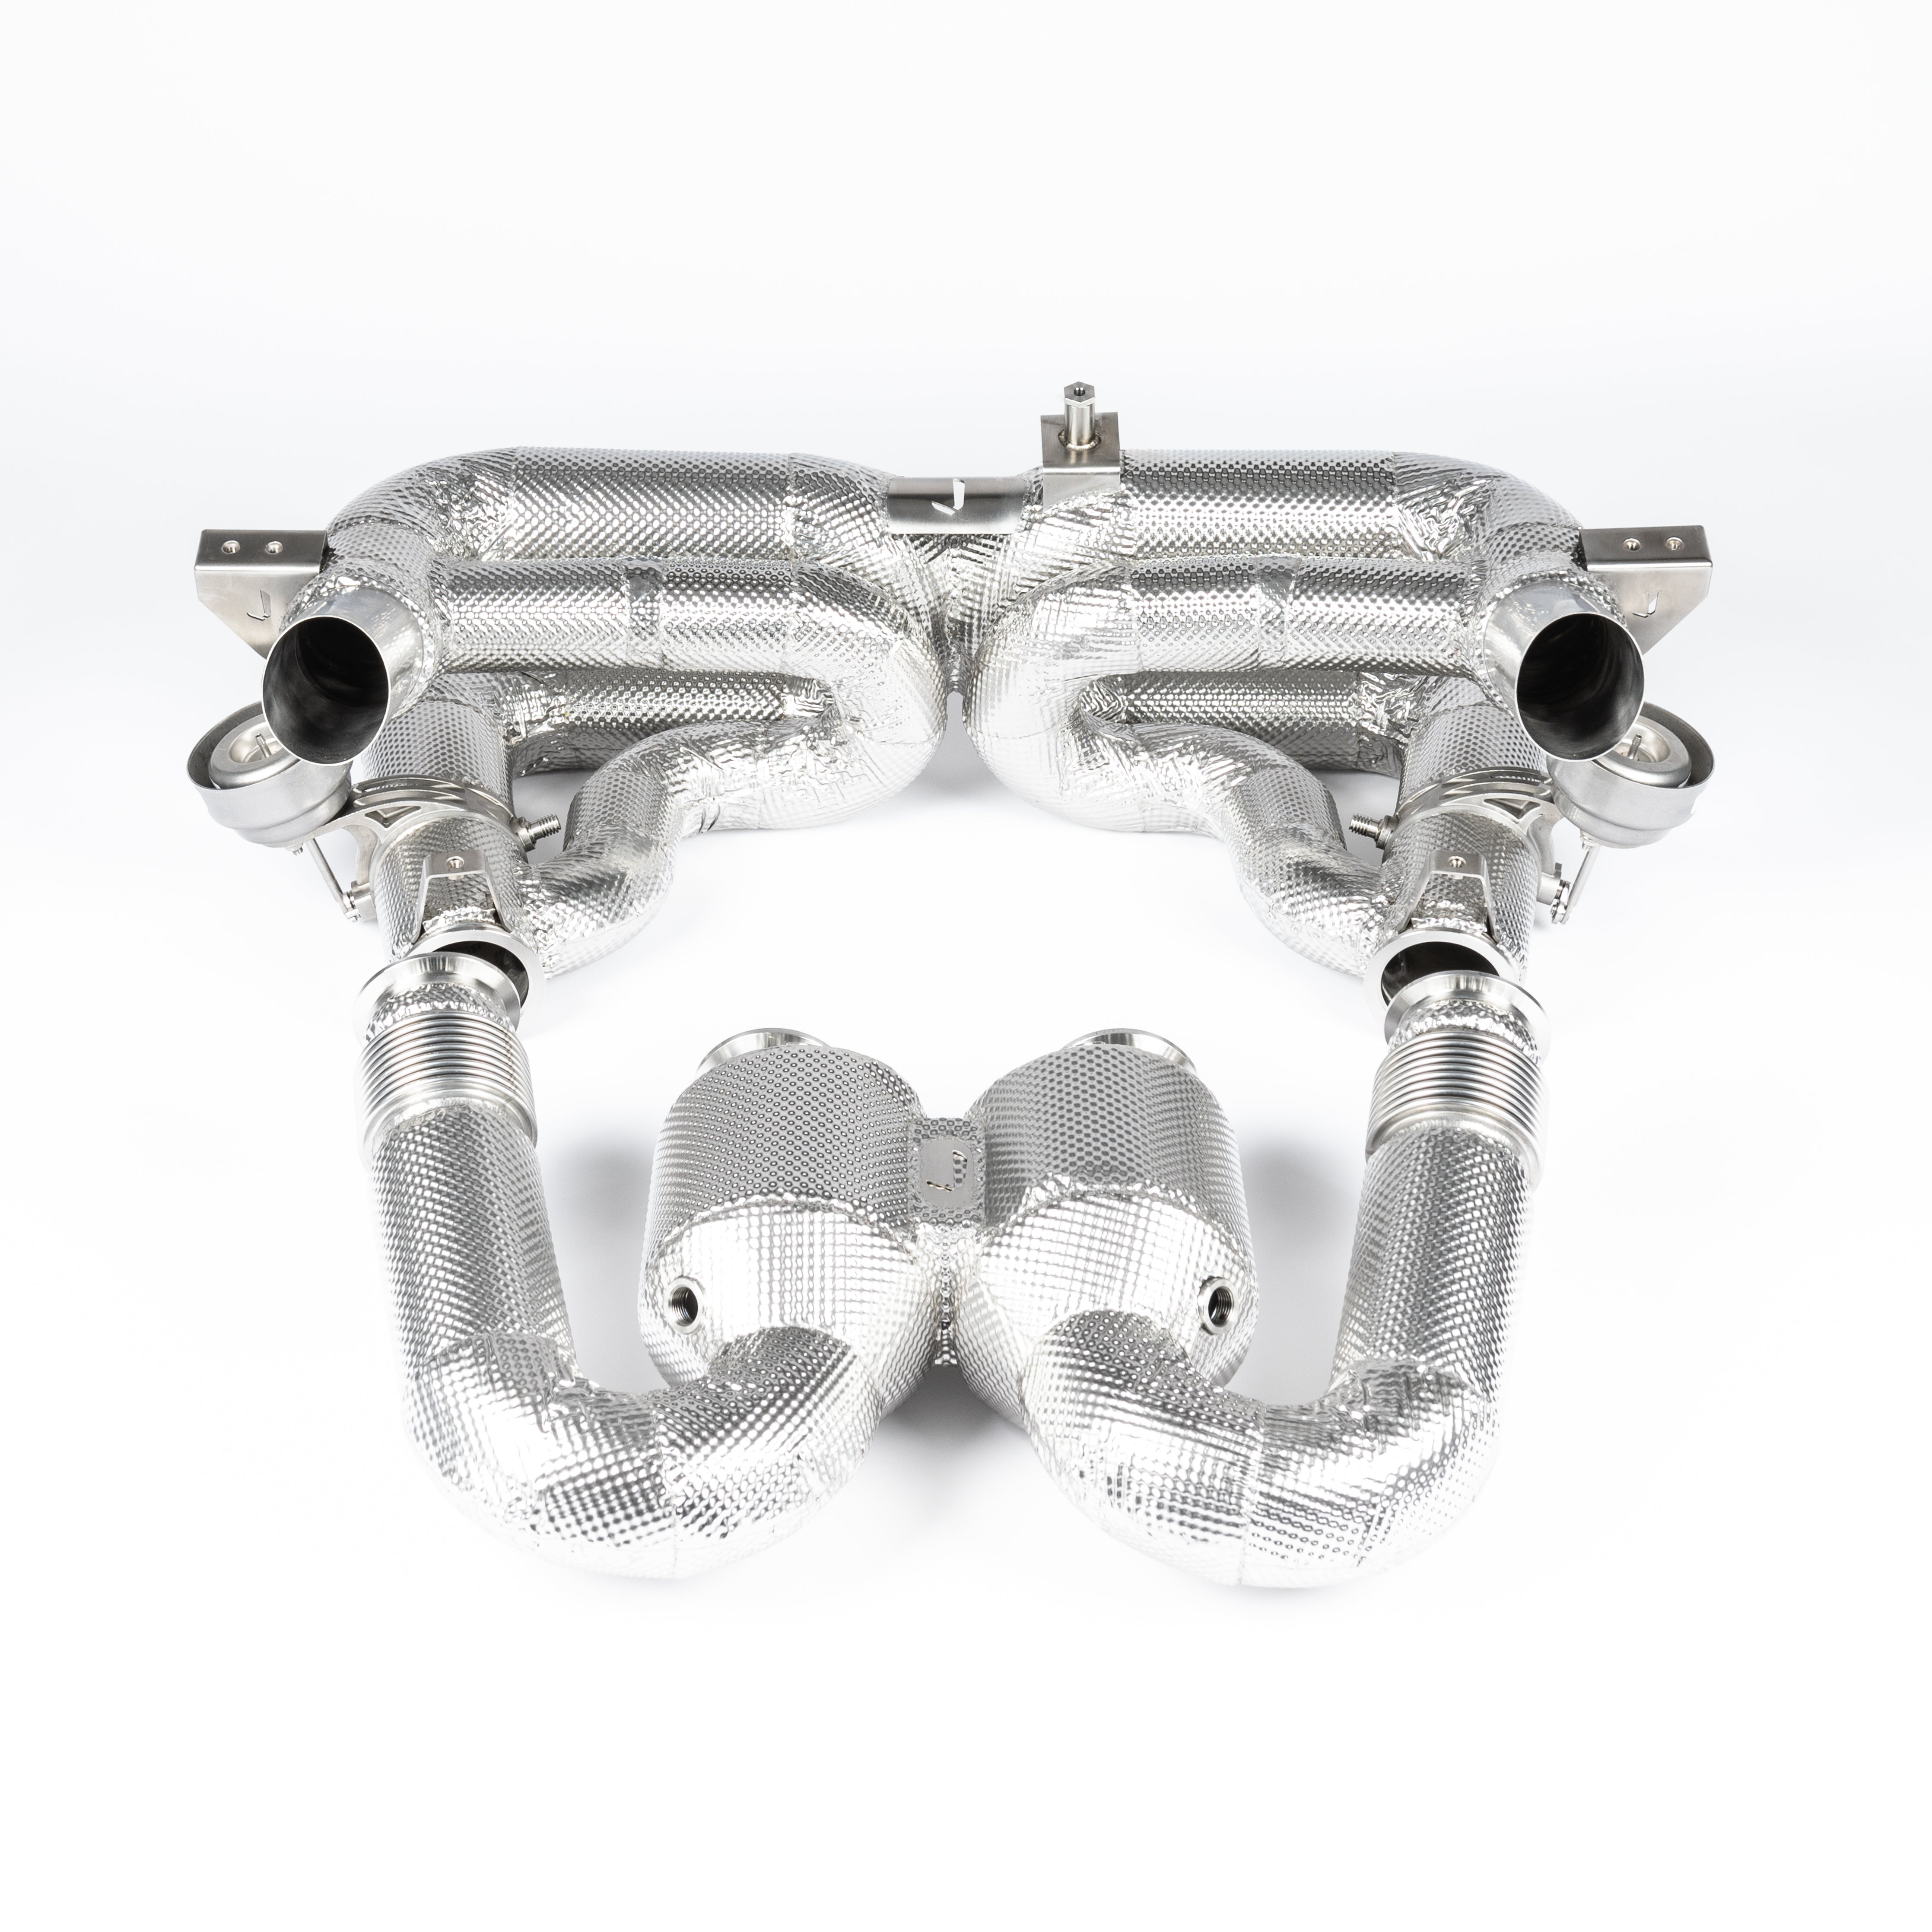 918 SPYDER INCONEL VALVED RACE PIPE &amp; RACE CATS